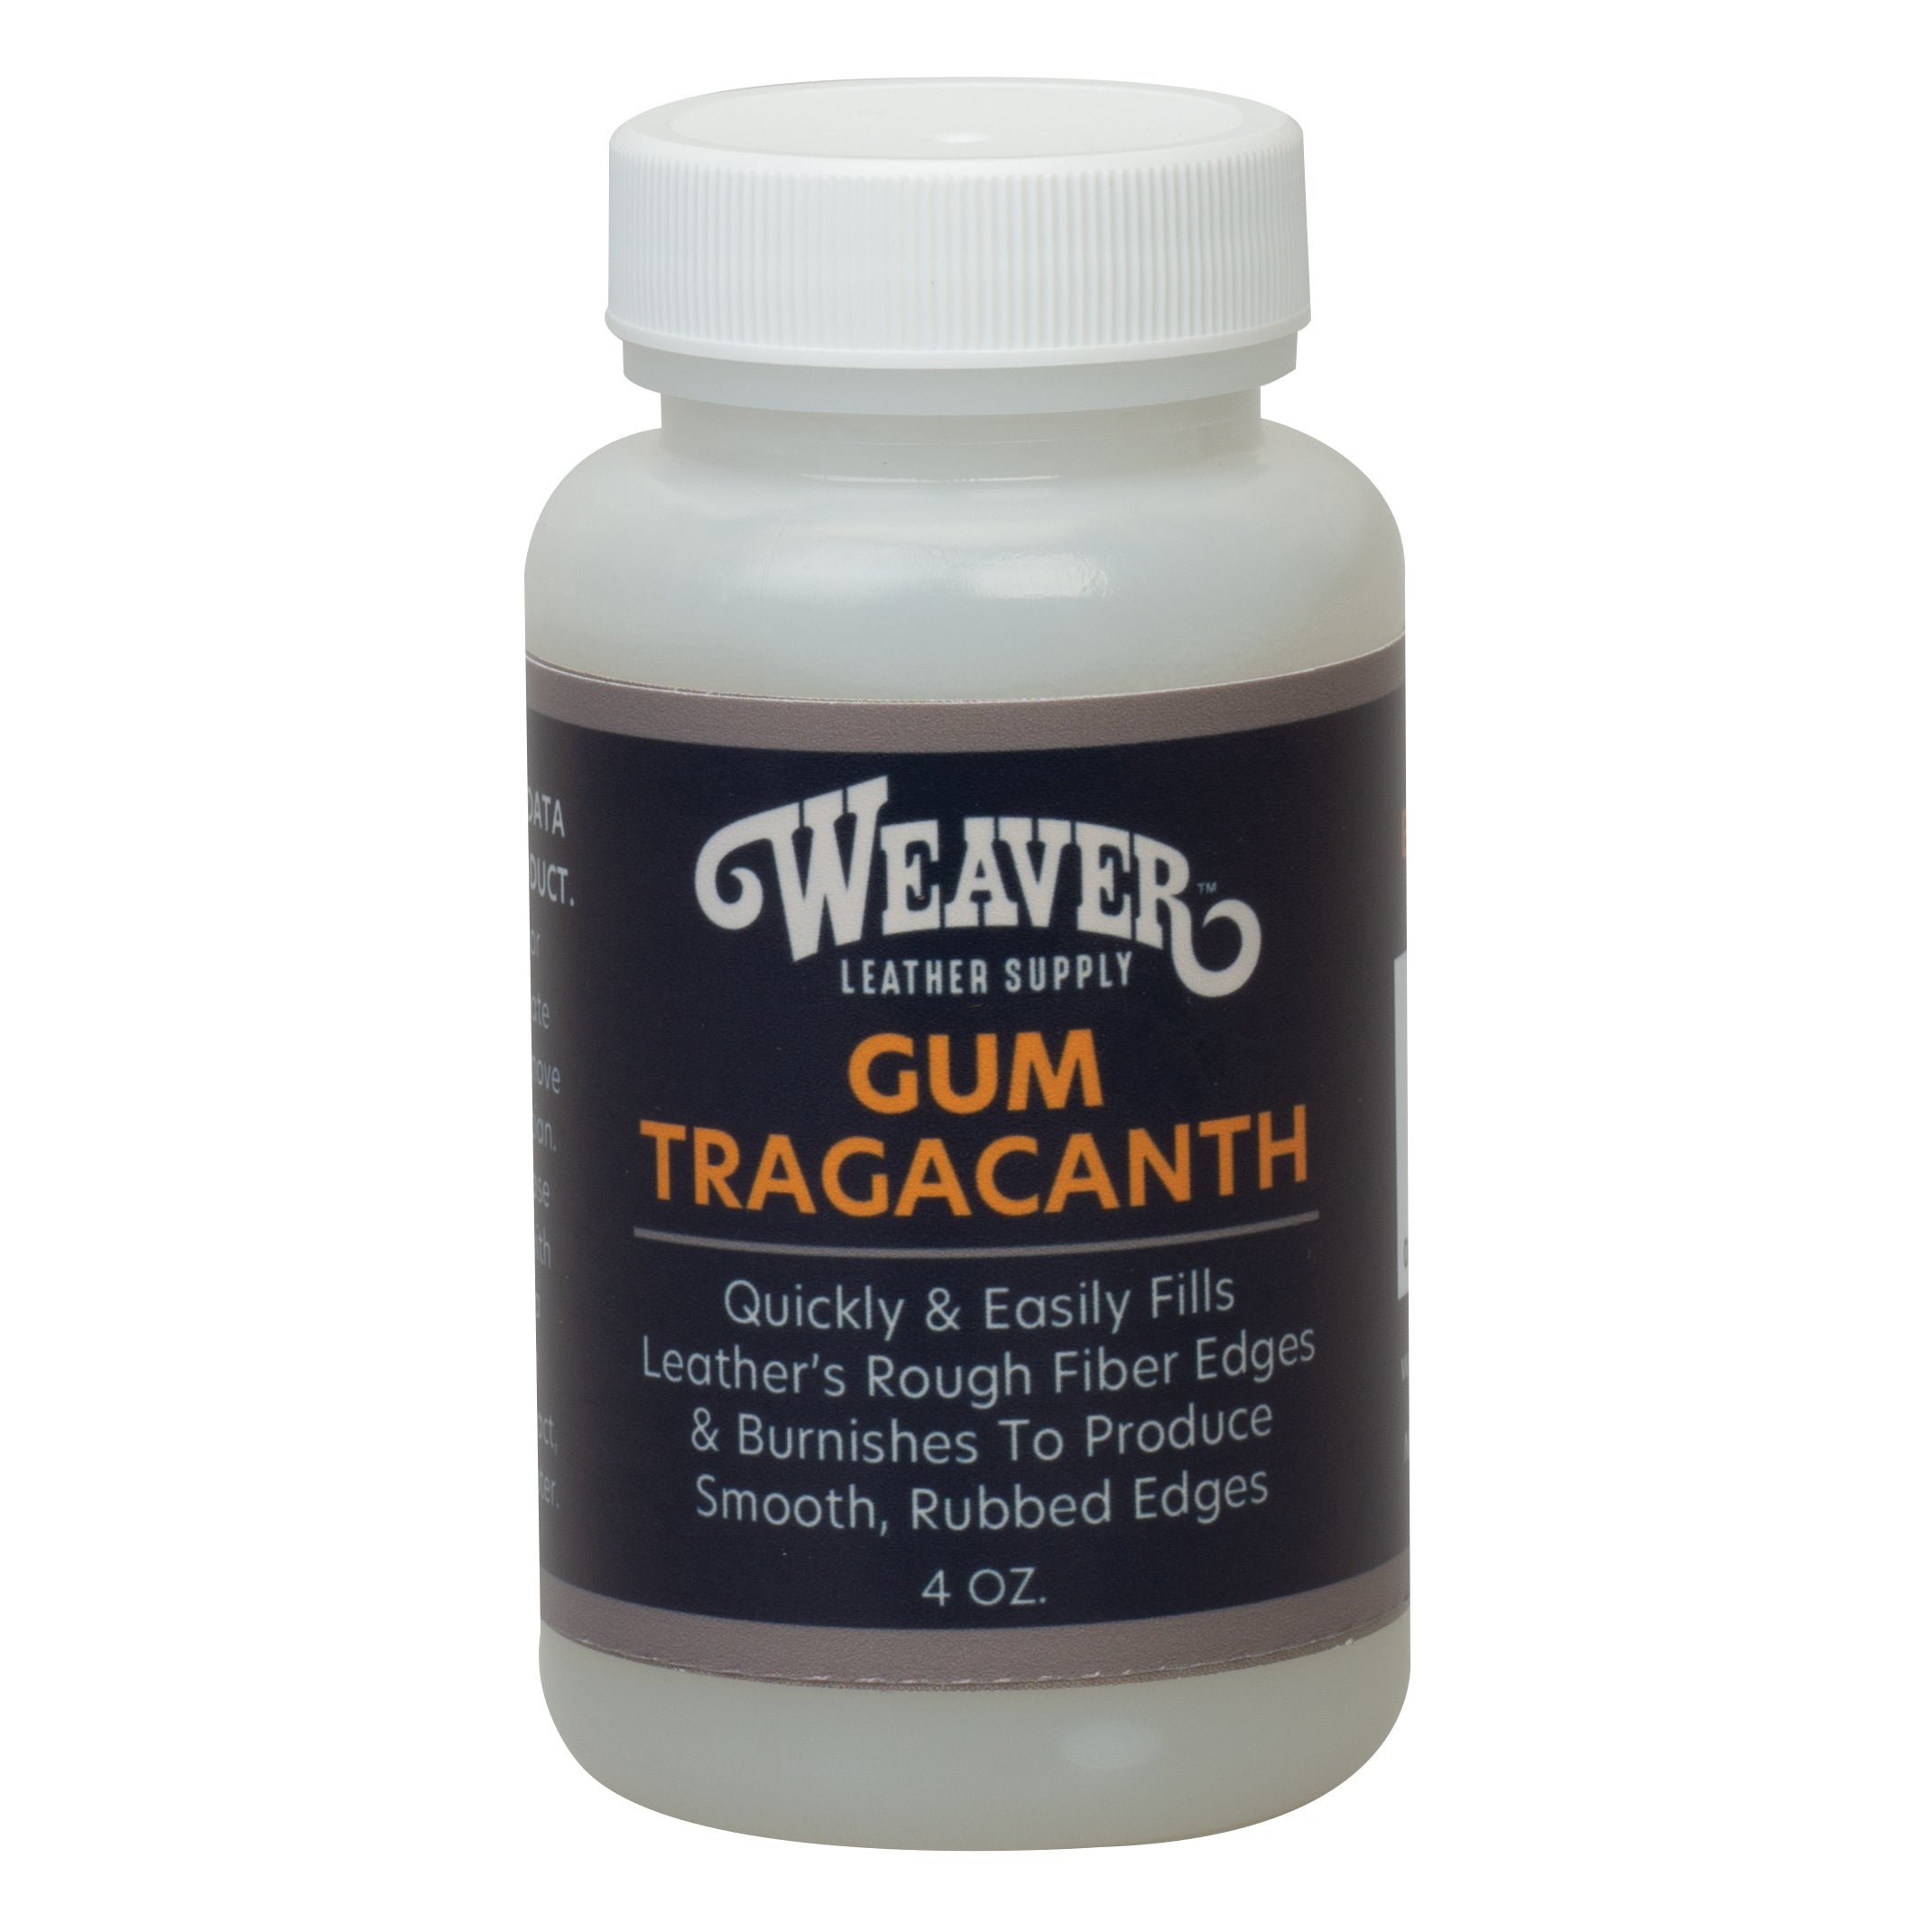 Gum Tragacanth is a pure powder-free high-quality natural sticky substance  from Astragalus Gummifer wood which has been used for…